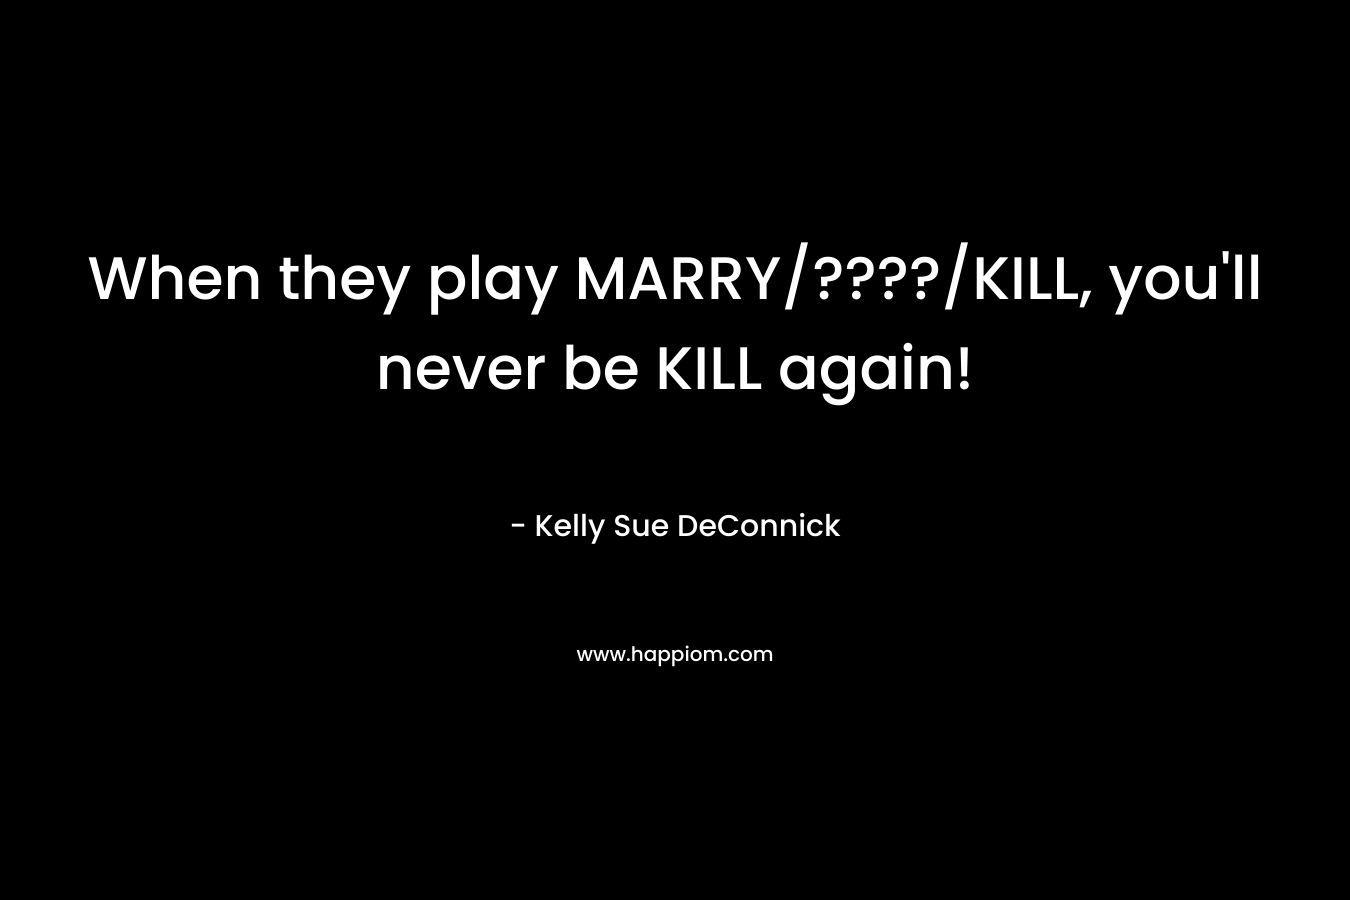 When they play MARRY/????/KILL, you'll never be KILL again!